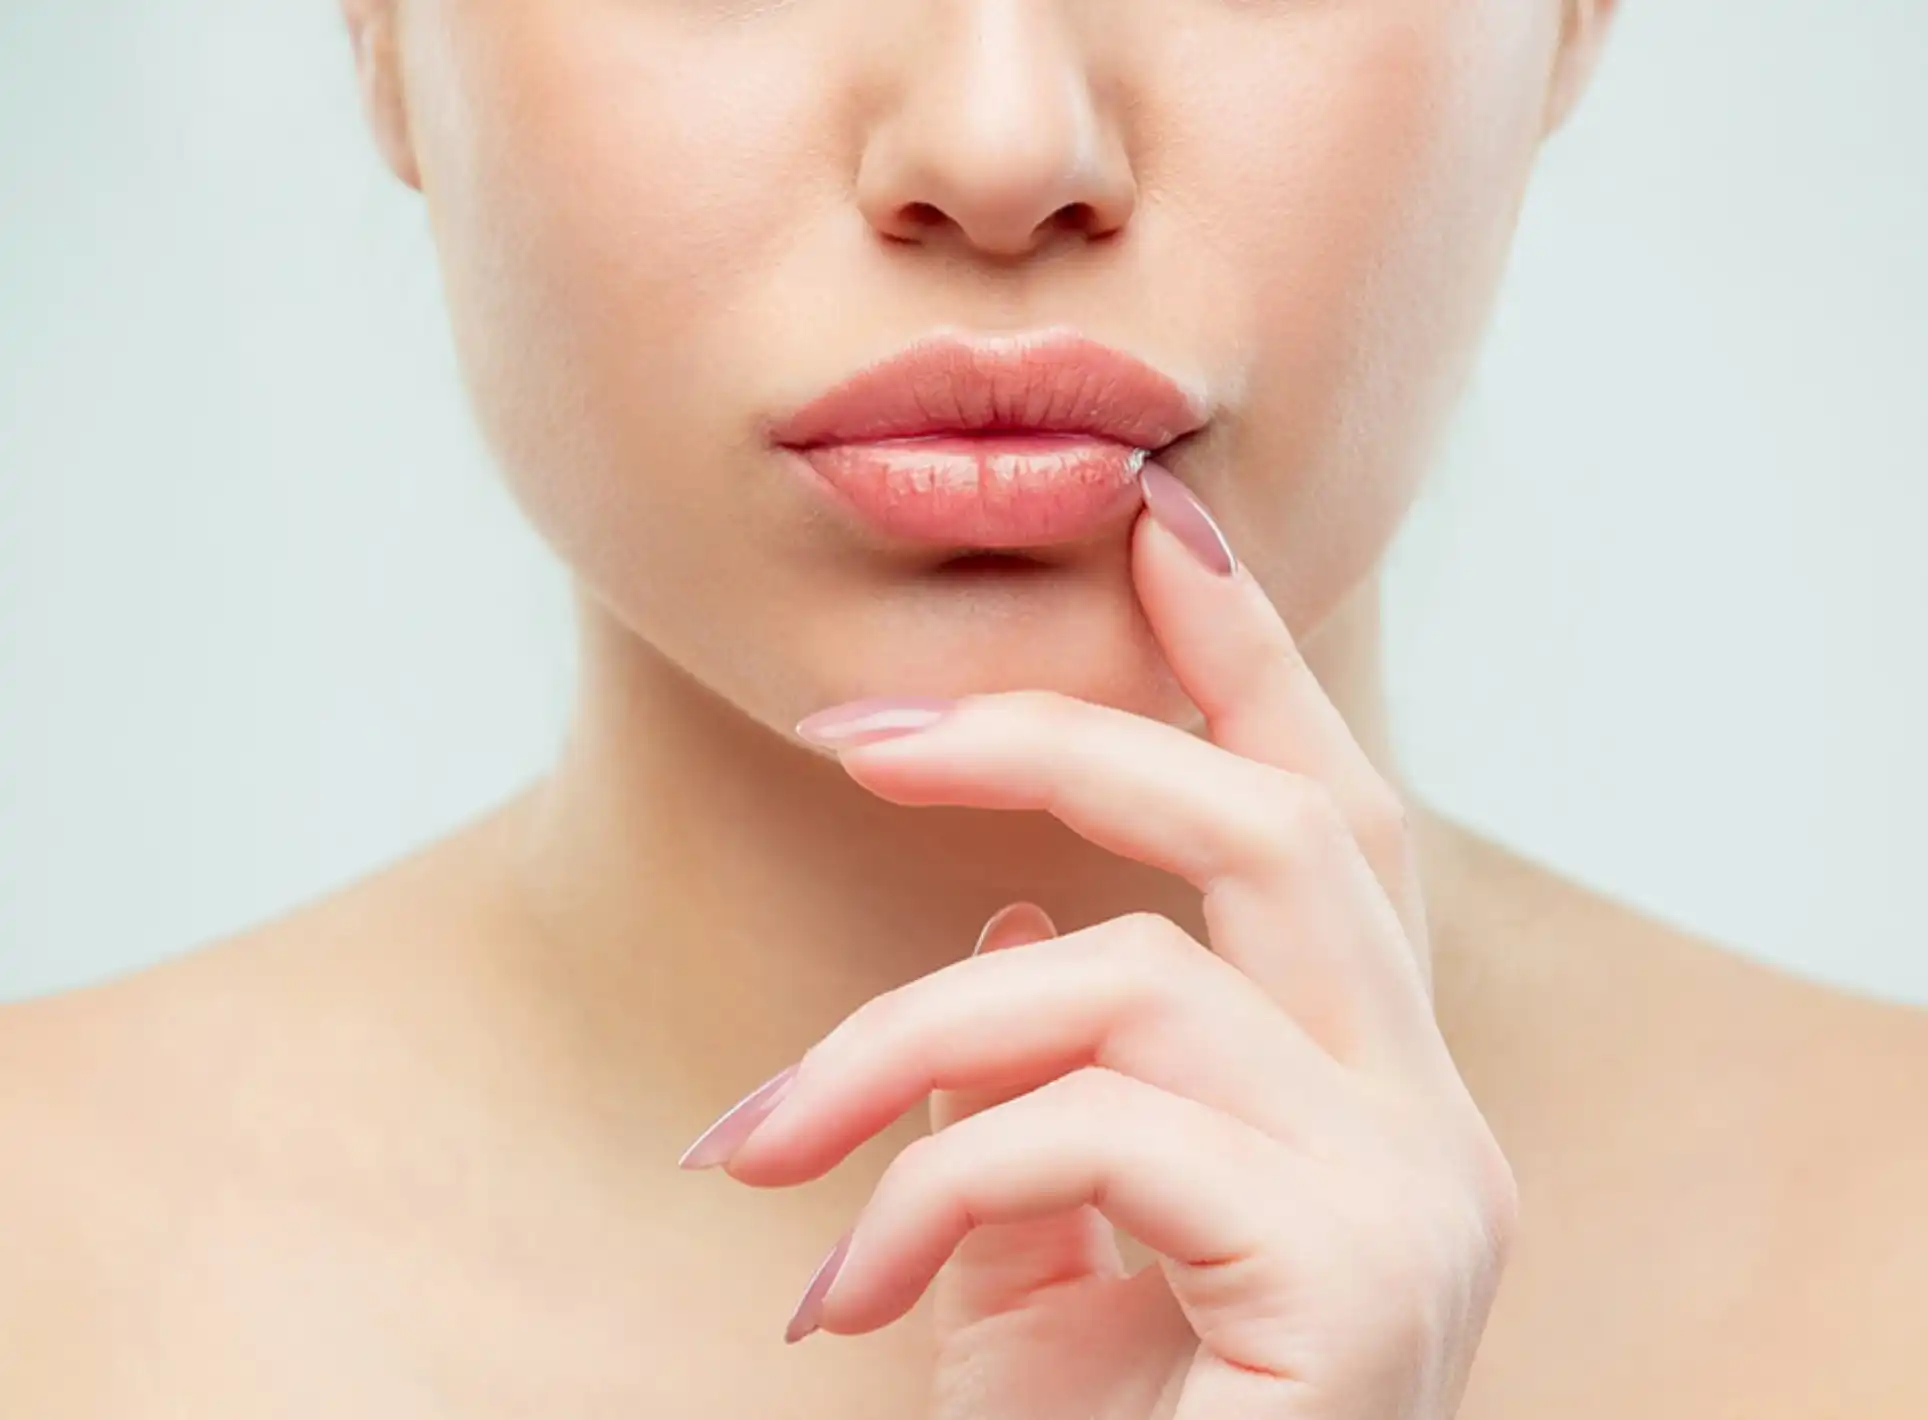 Choosing the Right Surgeon for Your Lip Lift in Dubai